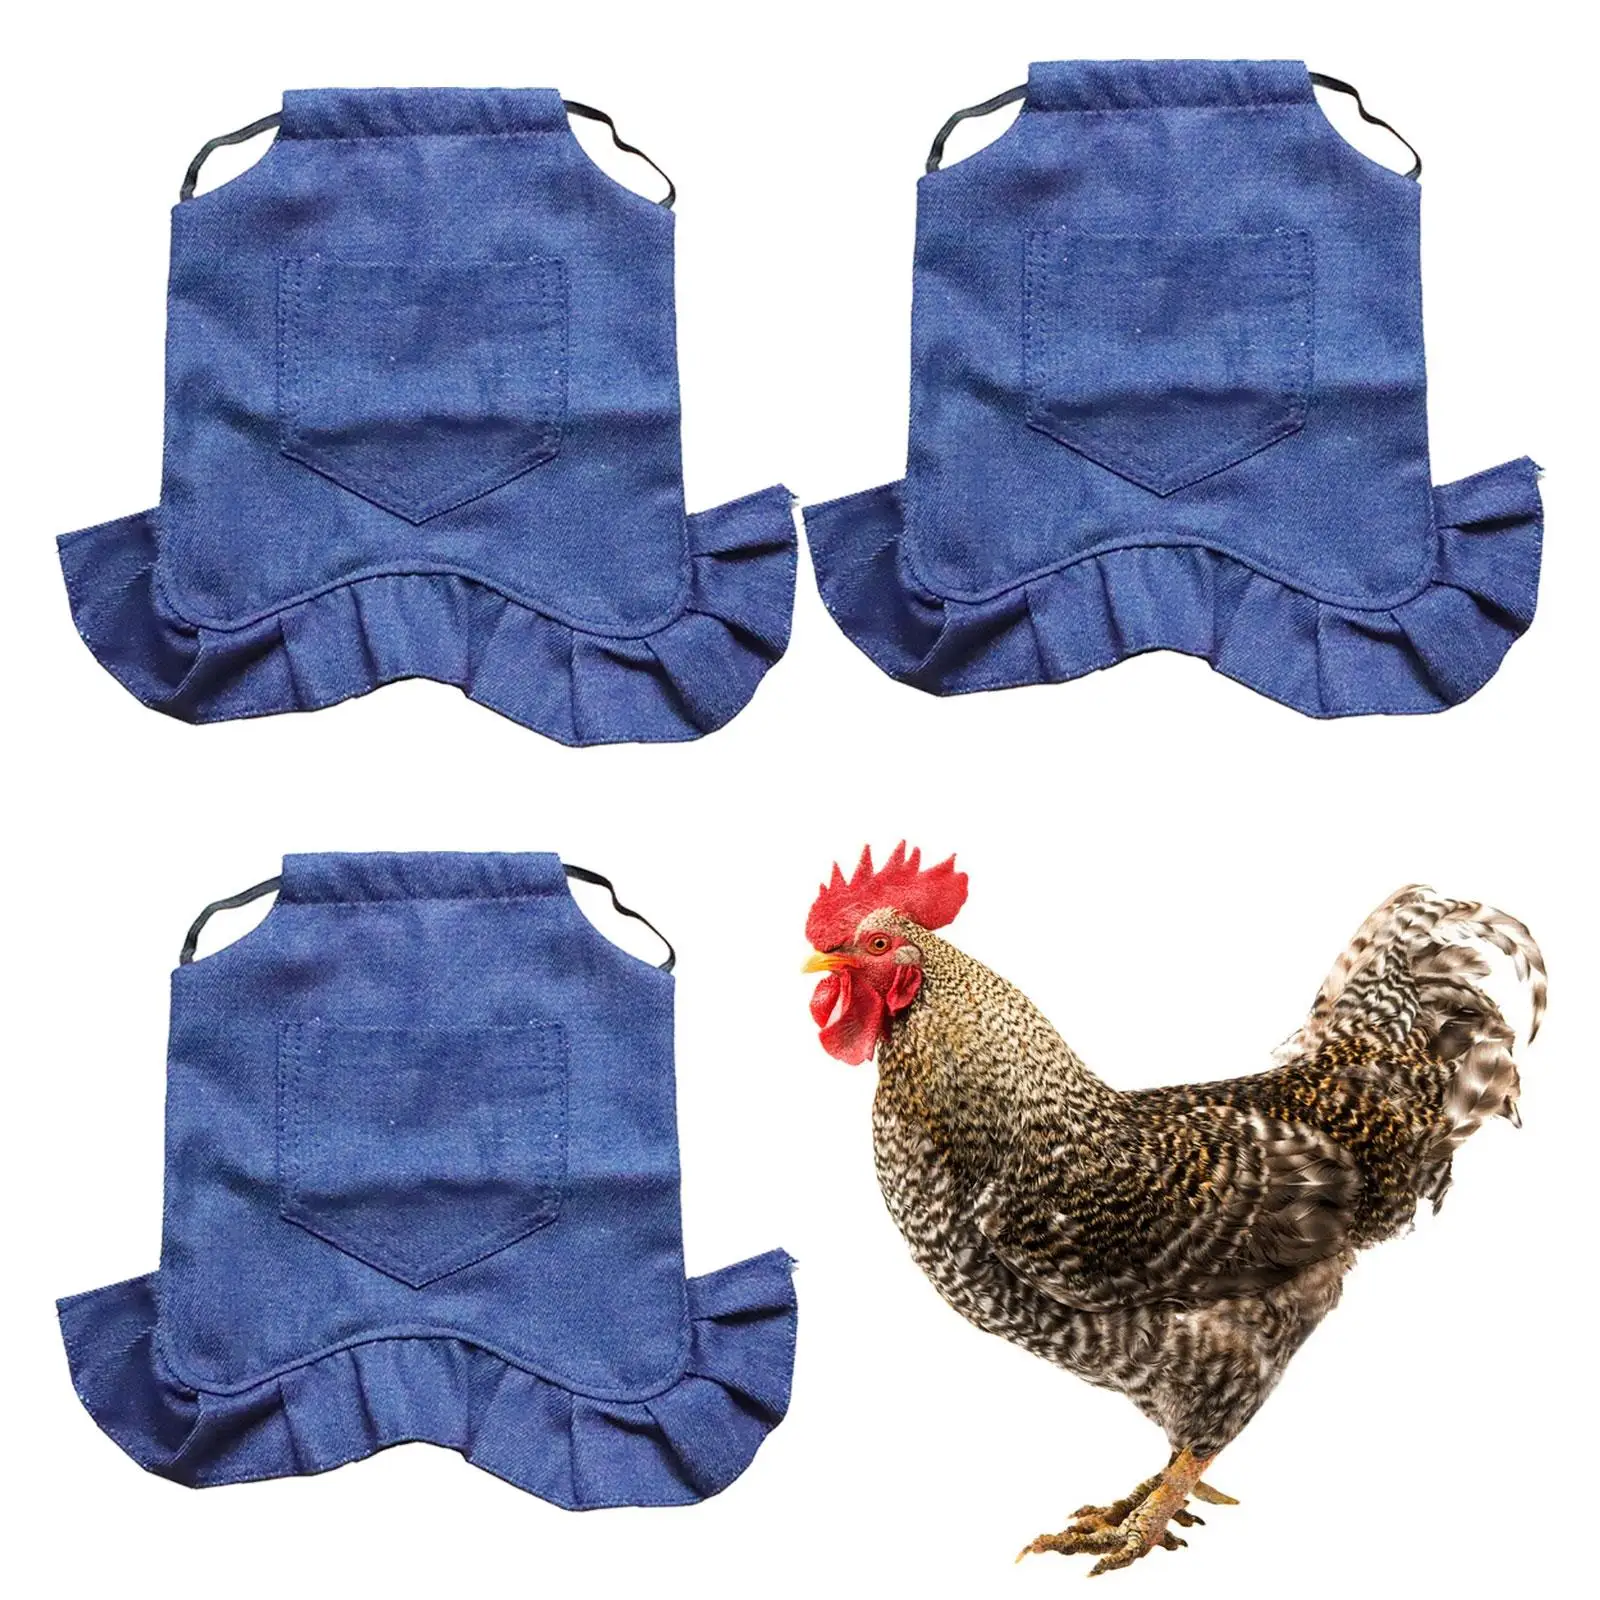 3x Chicken Saddle Hens Durable with Pocket Poultry Saver Feather Protection Jackets Pet Poultry Supplies Pet Clothes Hen Apron